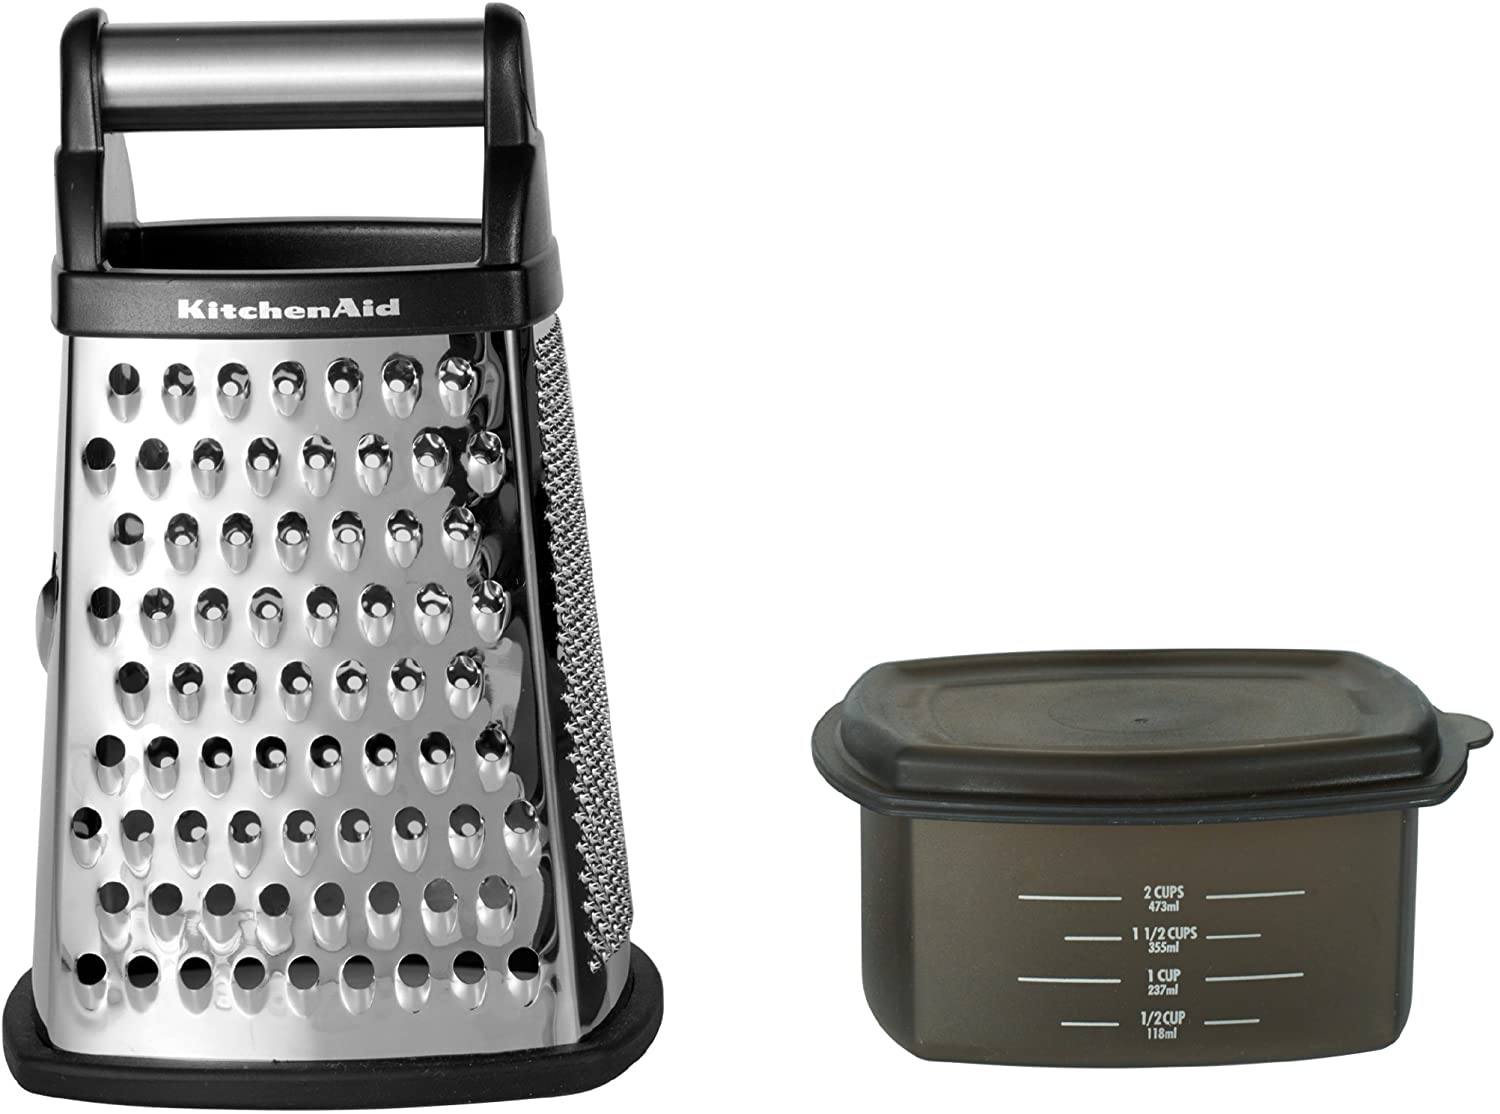 KitchenAid Gourmet 4-Sided Stainless Steel Box Grater with Detachable Storage Container